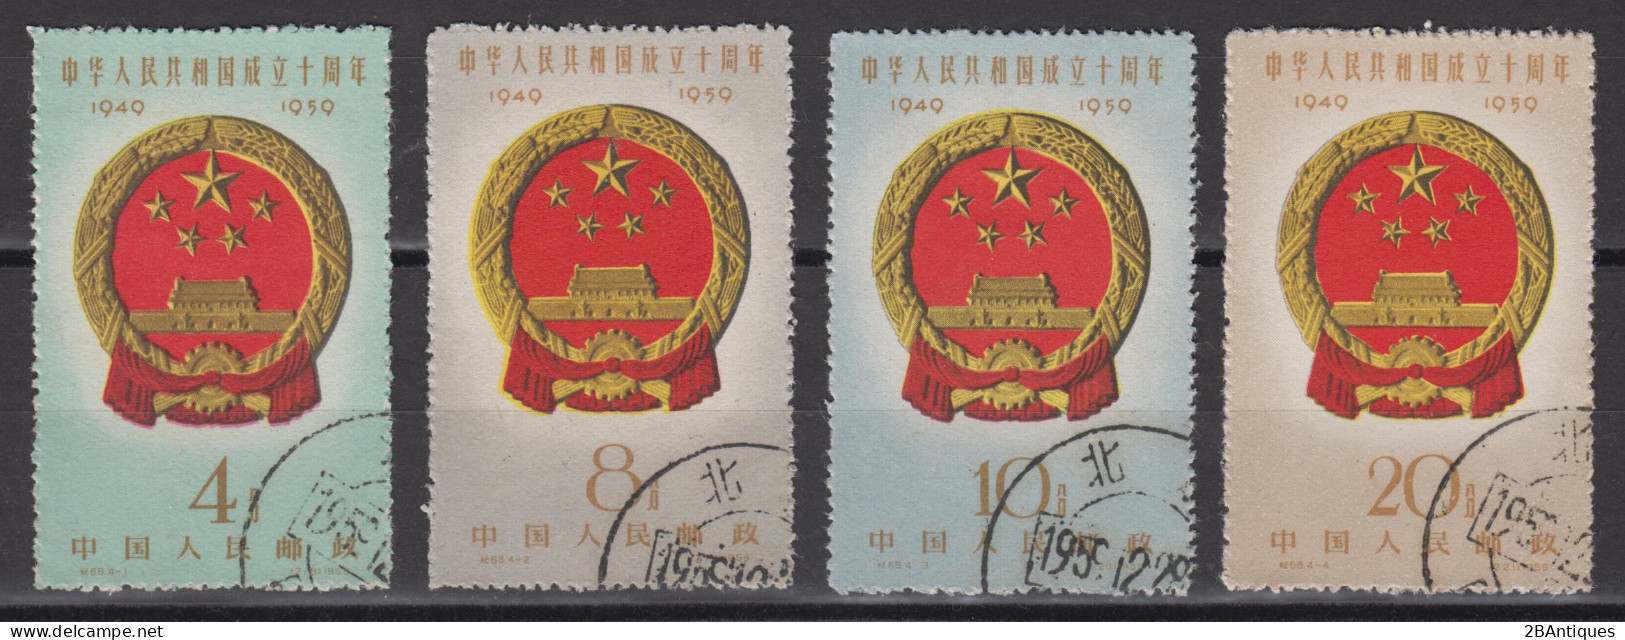 PR CHINA 1959 - The 10th Anniversary Of People's Republic CTO XF - Used Stamps